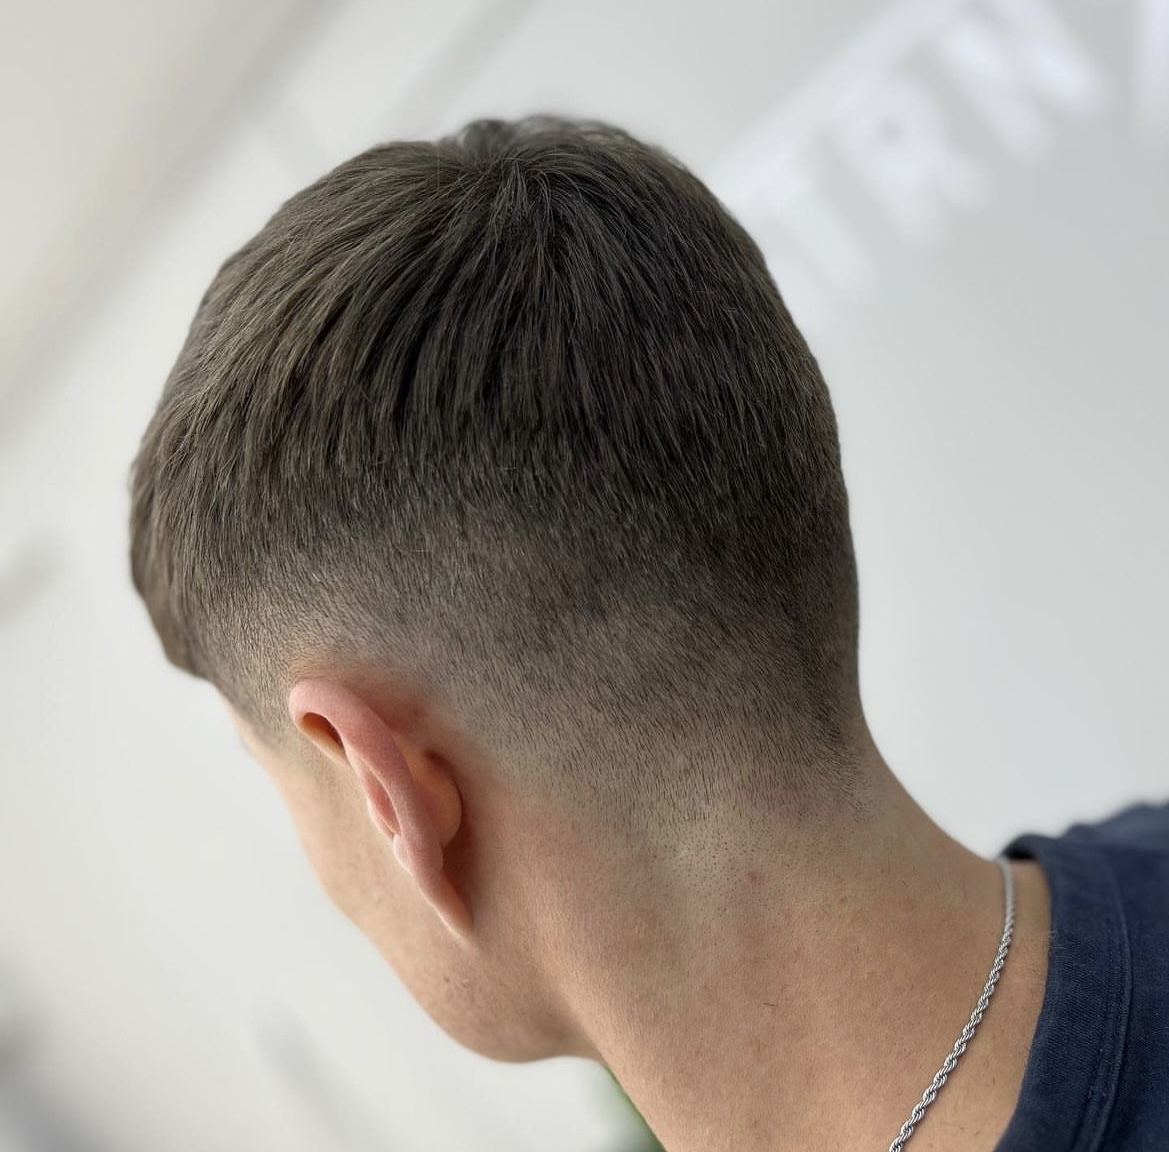 Classic short back and sides with taper, graduated scissor work on top, done by Ned.